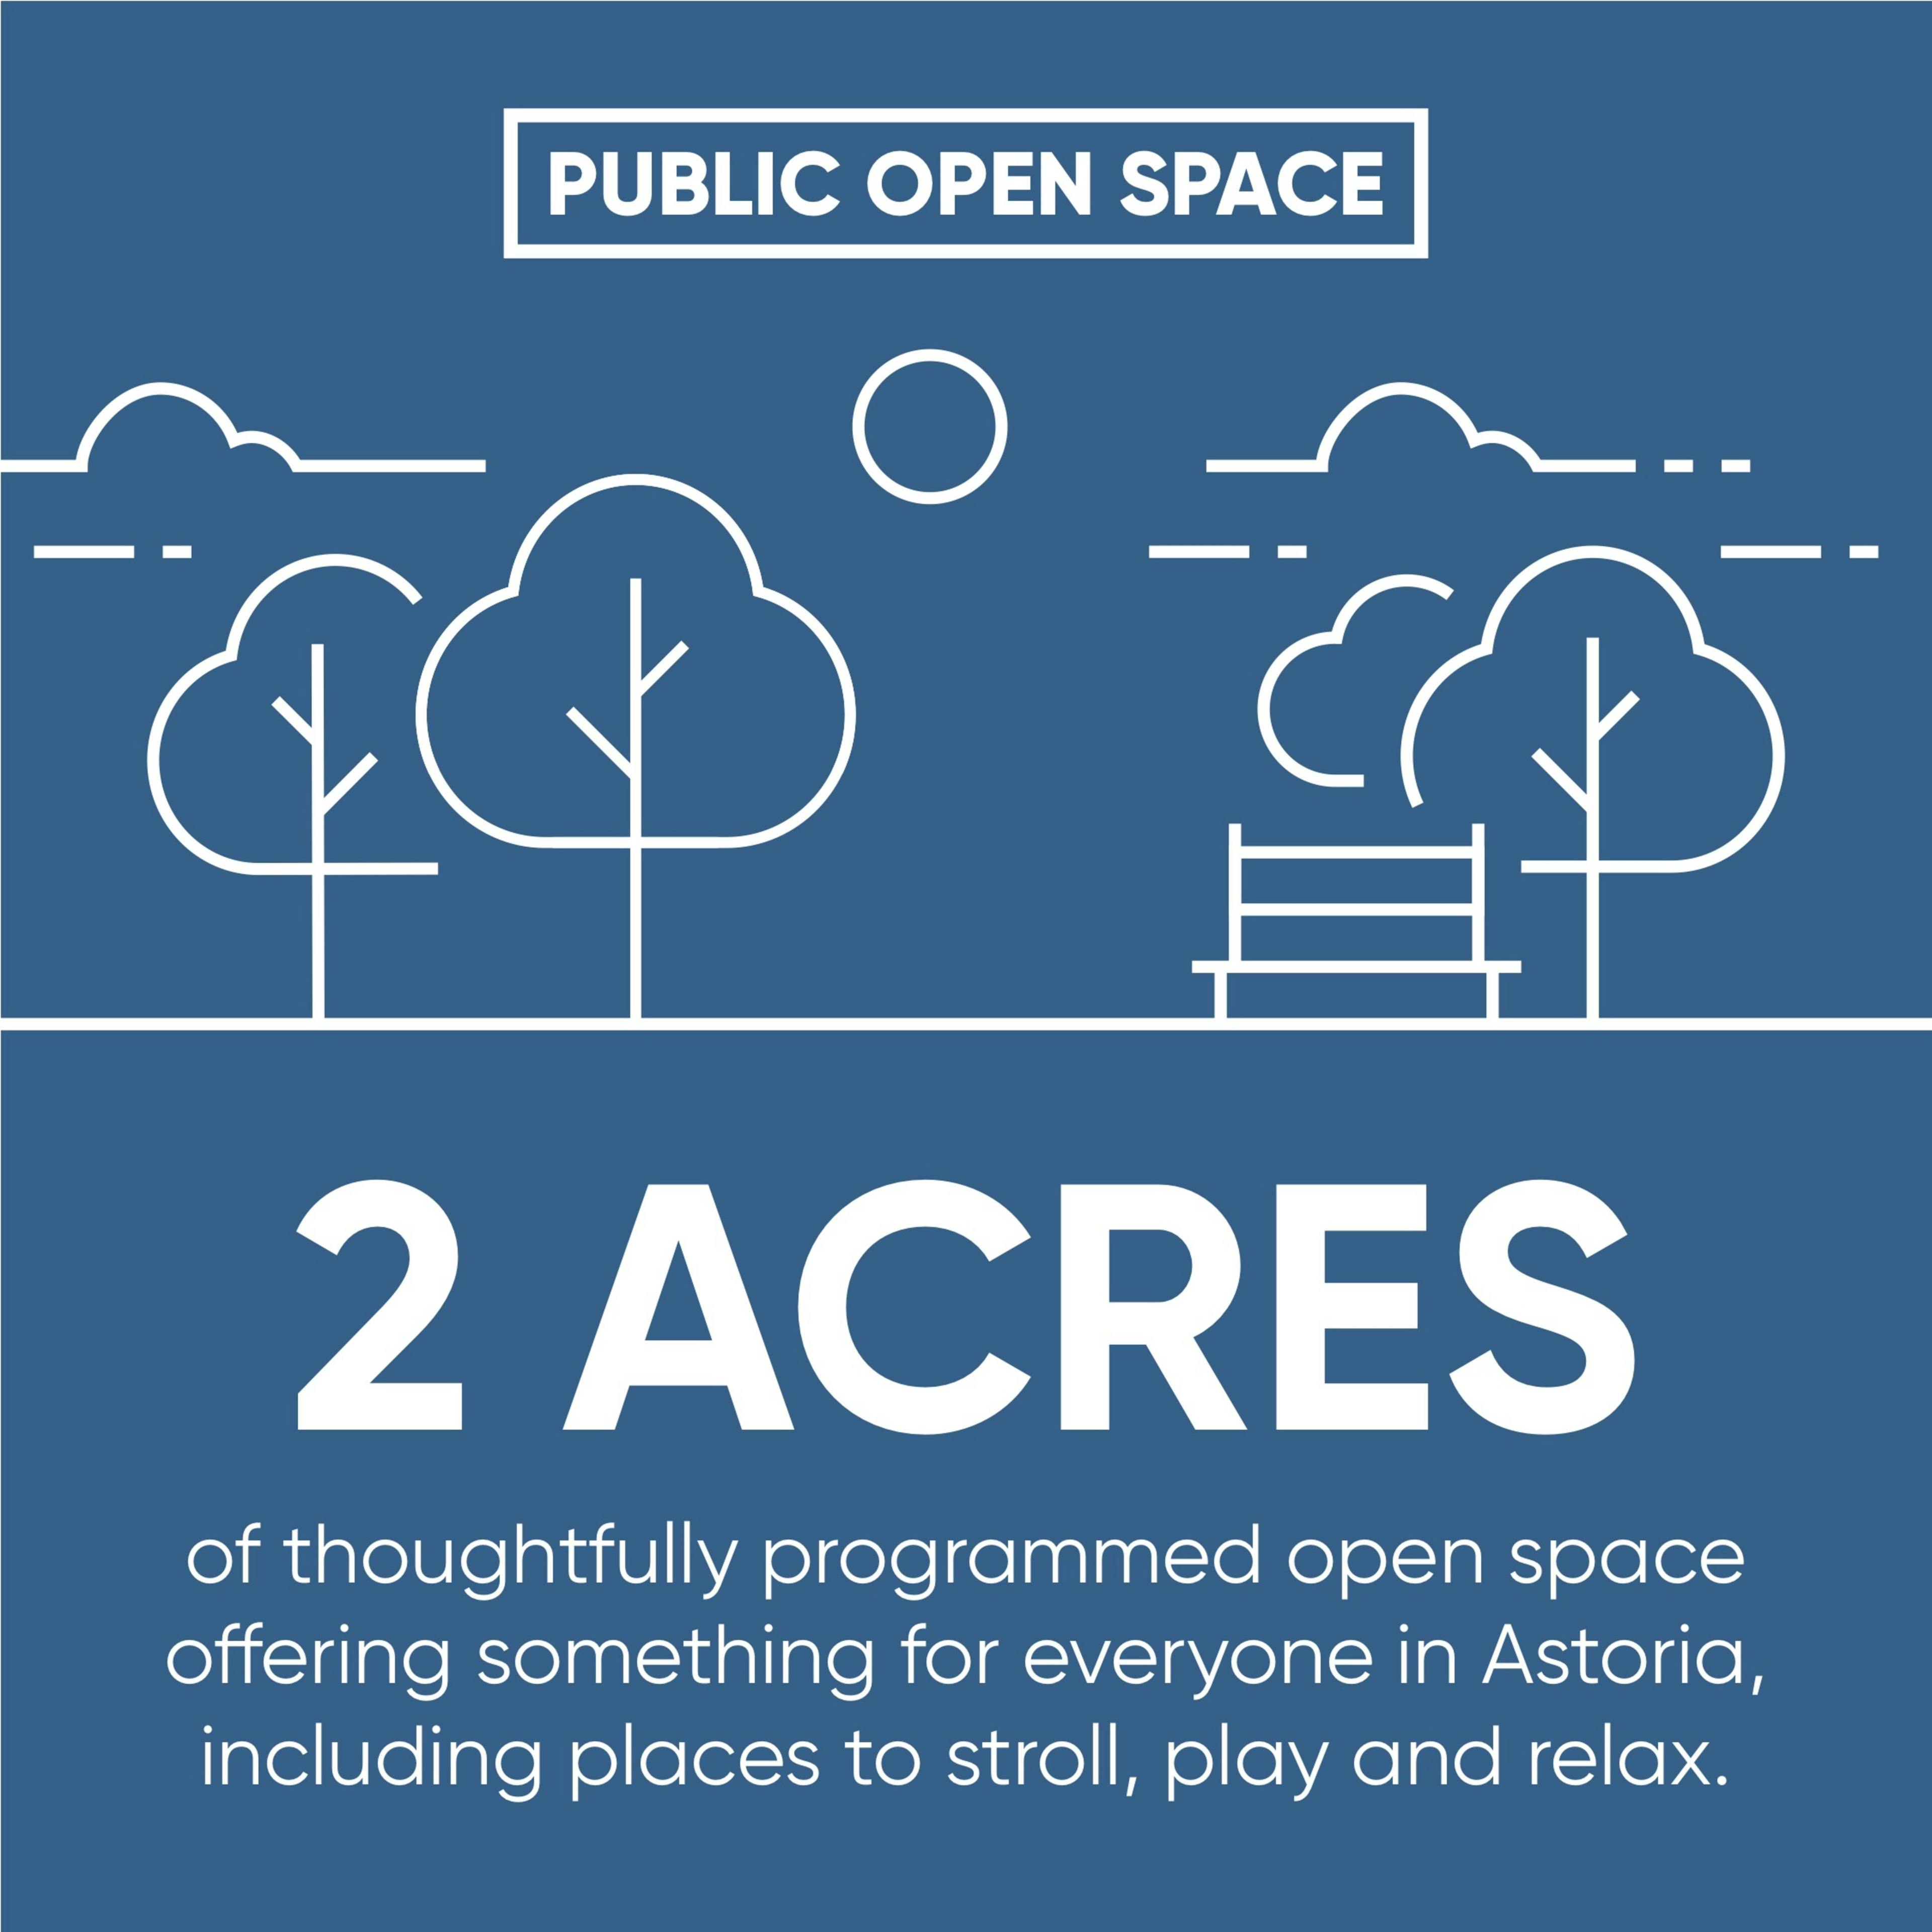 Infographic text: Public Open Space. 2 Acres of thoughtfully programmed open space offering something for everyone in Astoria including places to stroll, play and relax.